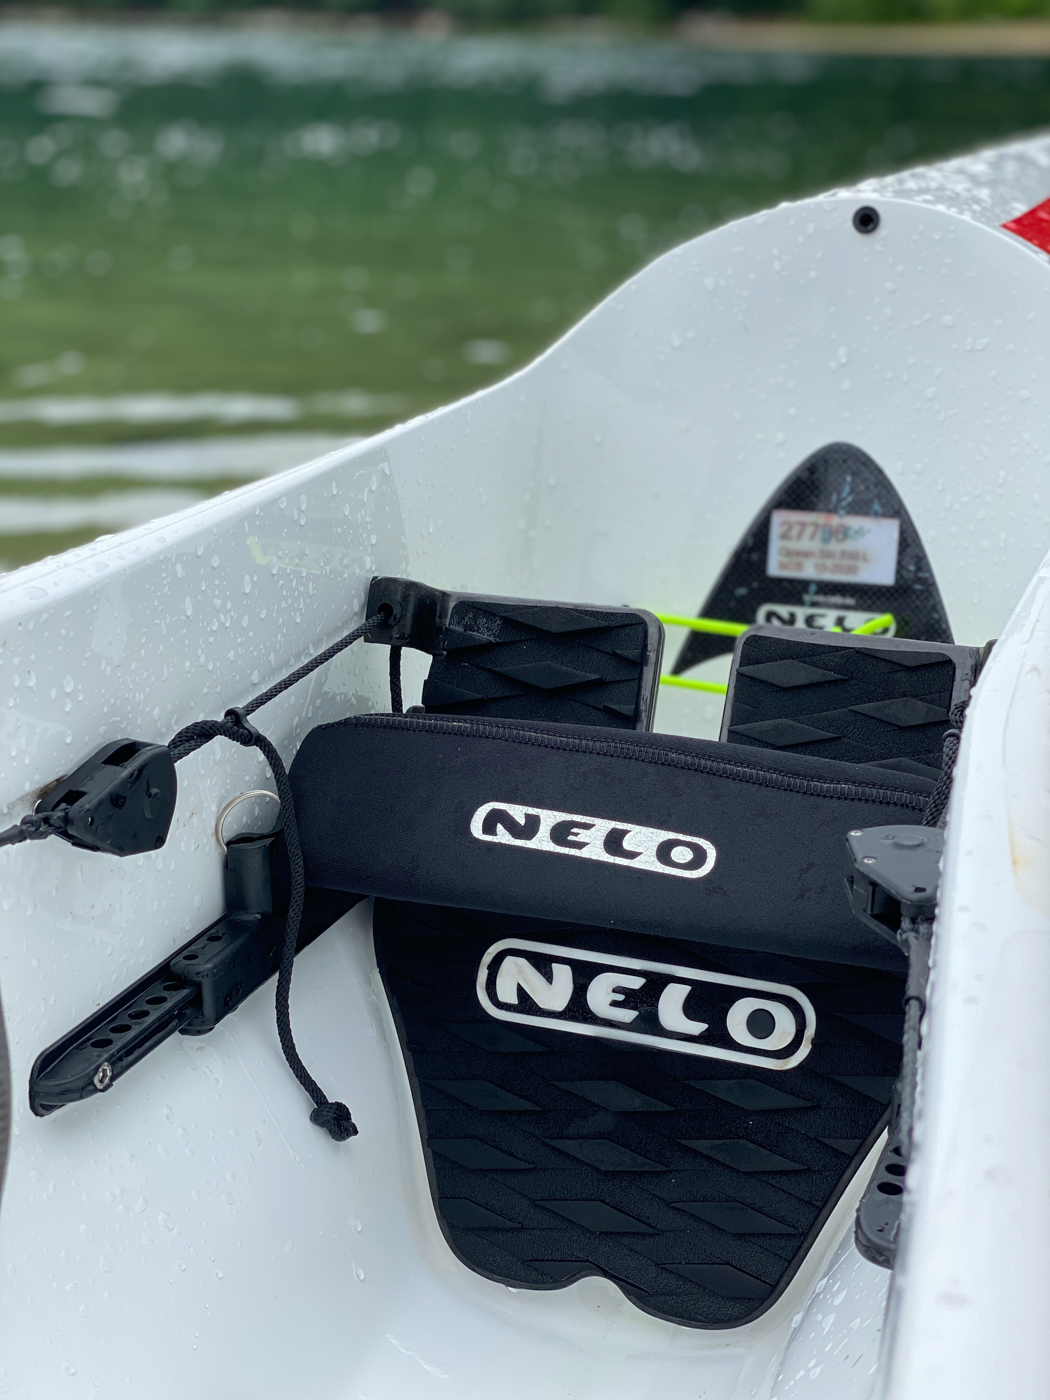 Nelo 550 Review, components, footplate